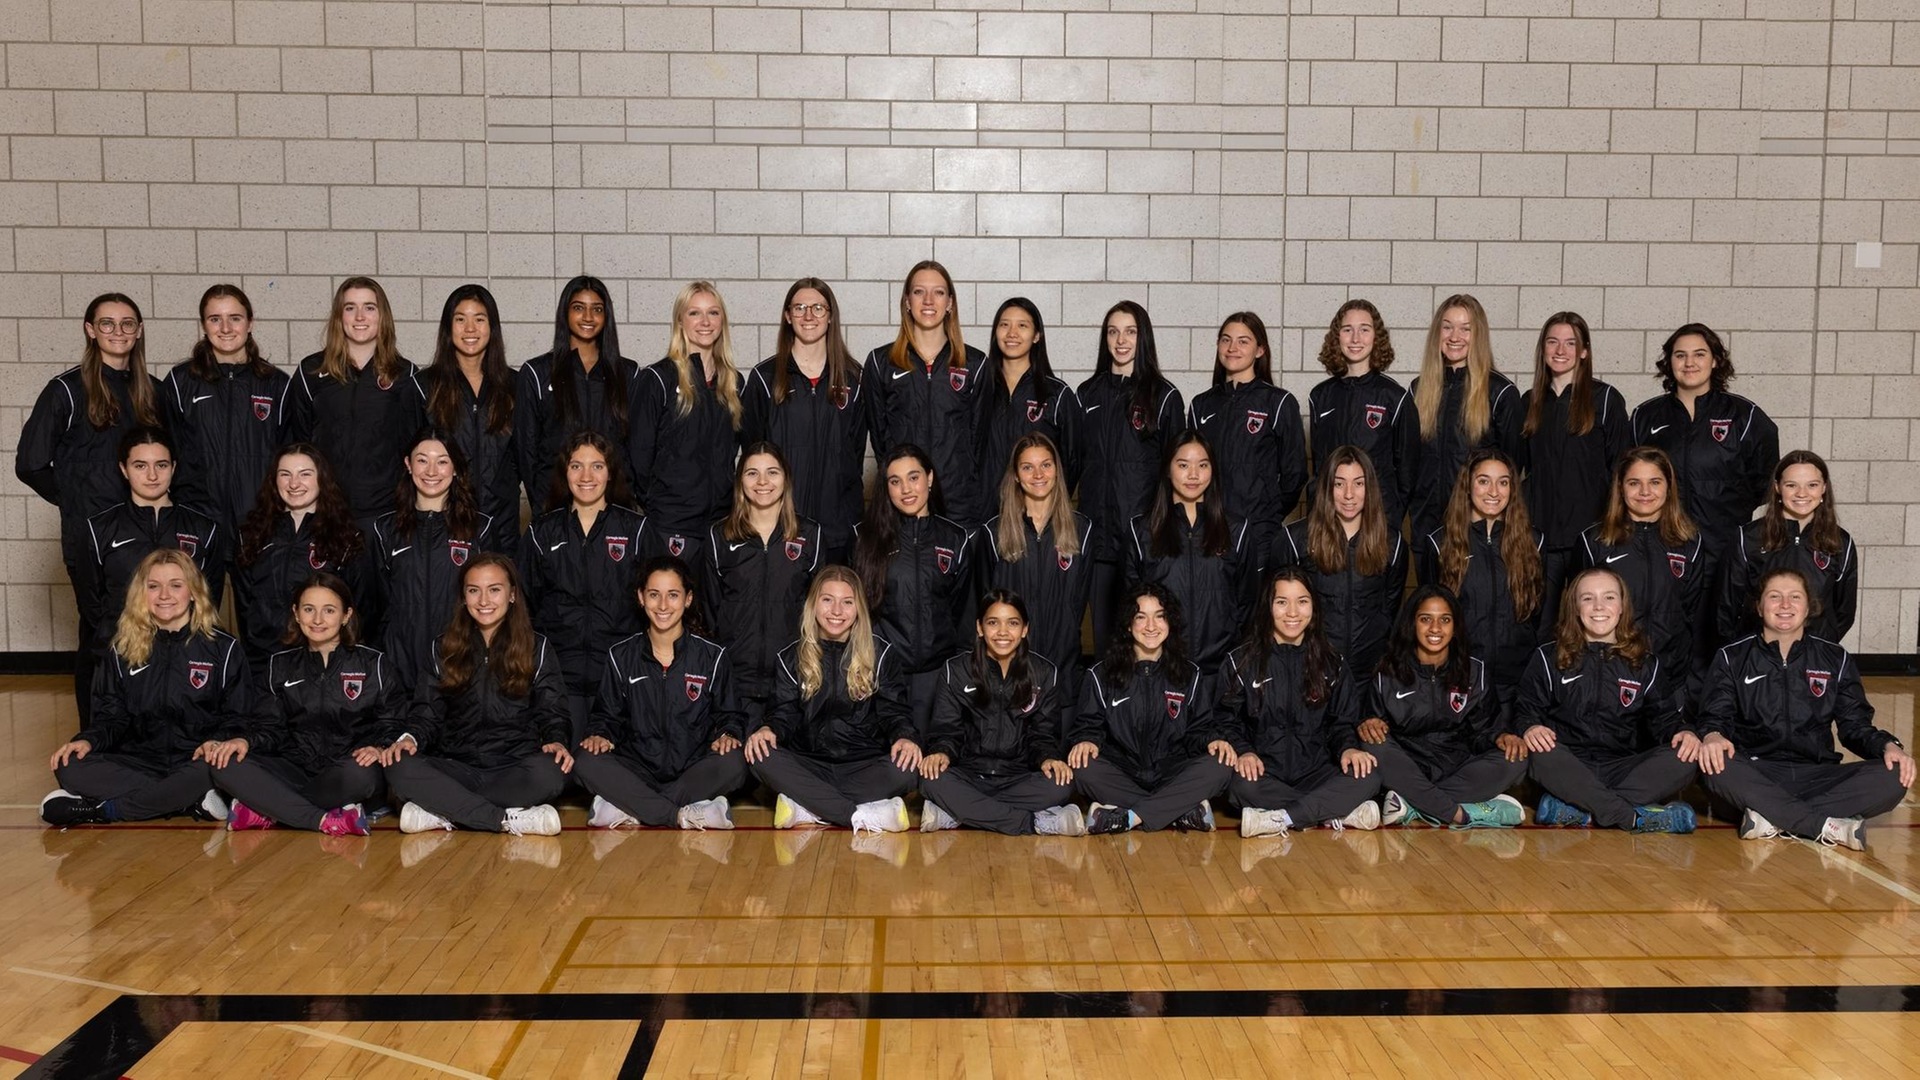 team photo of women's track and field team consisting of more than 40 people